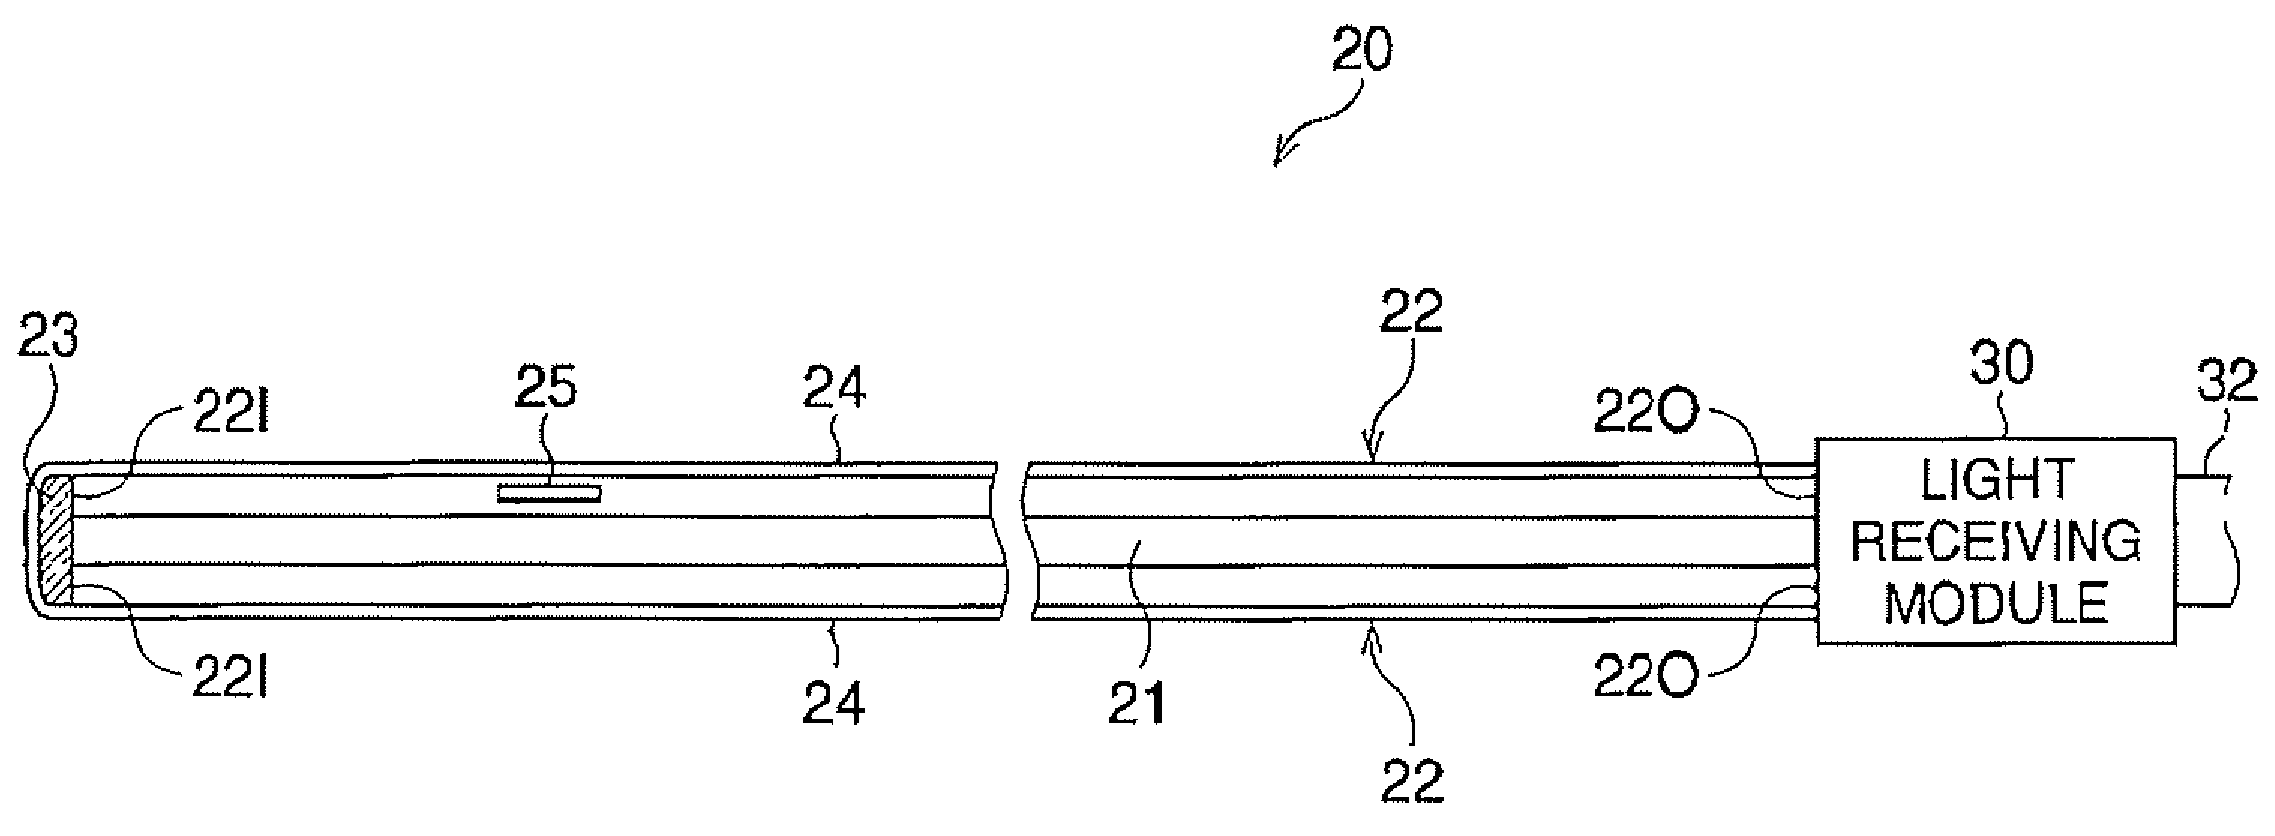 Configuration detection device for endoscope